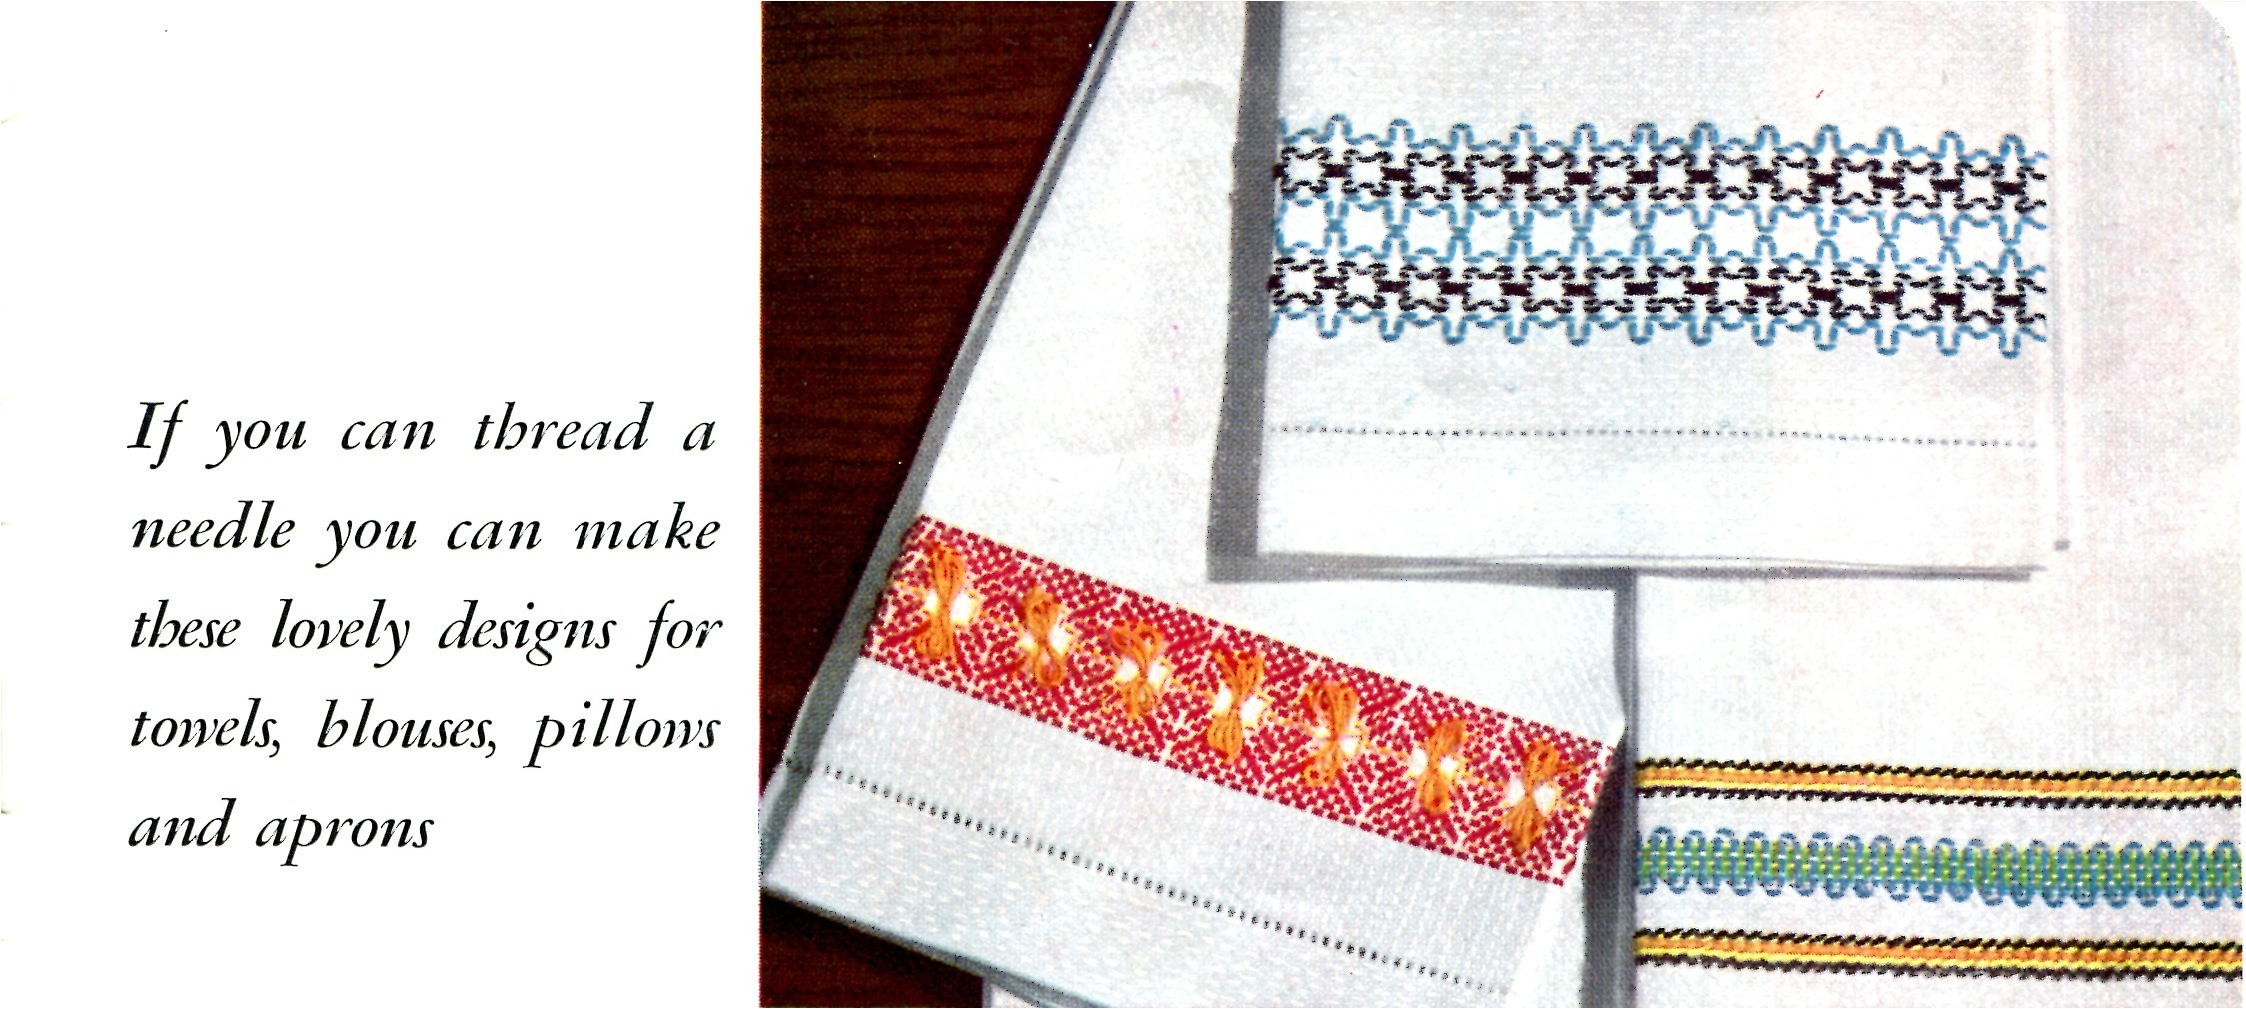 Swedish Embroidery Patterns How To Do Swedish Huck Weaving Embroidery Vintage Crafts And More